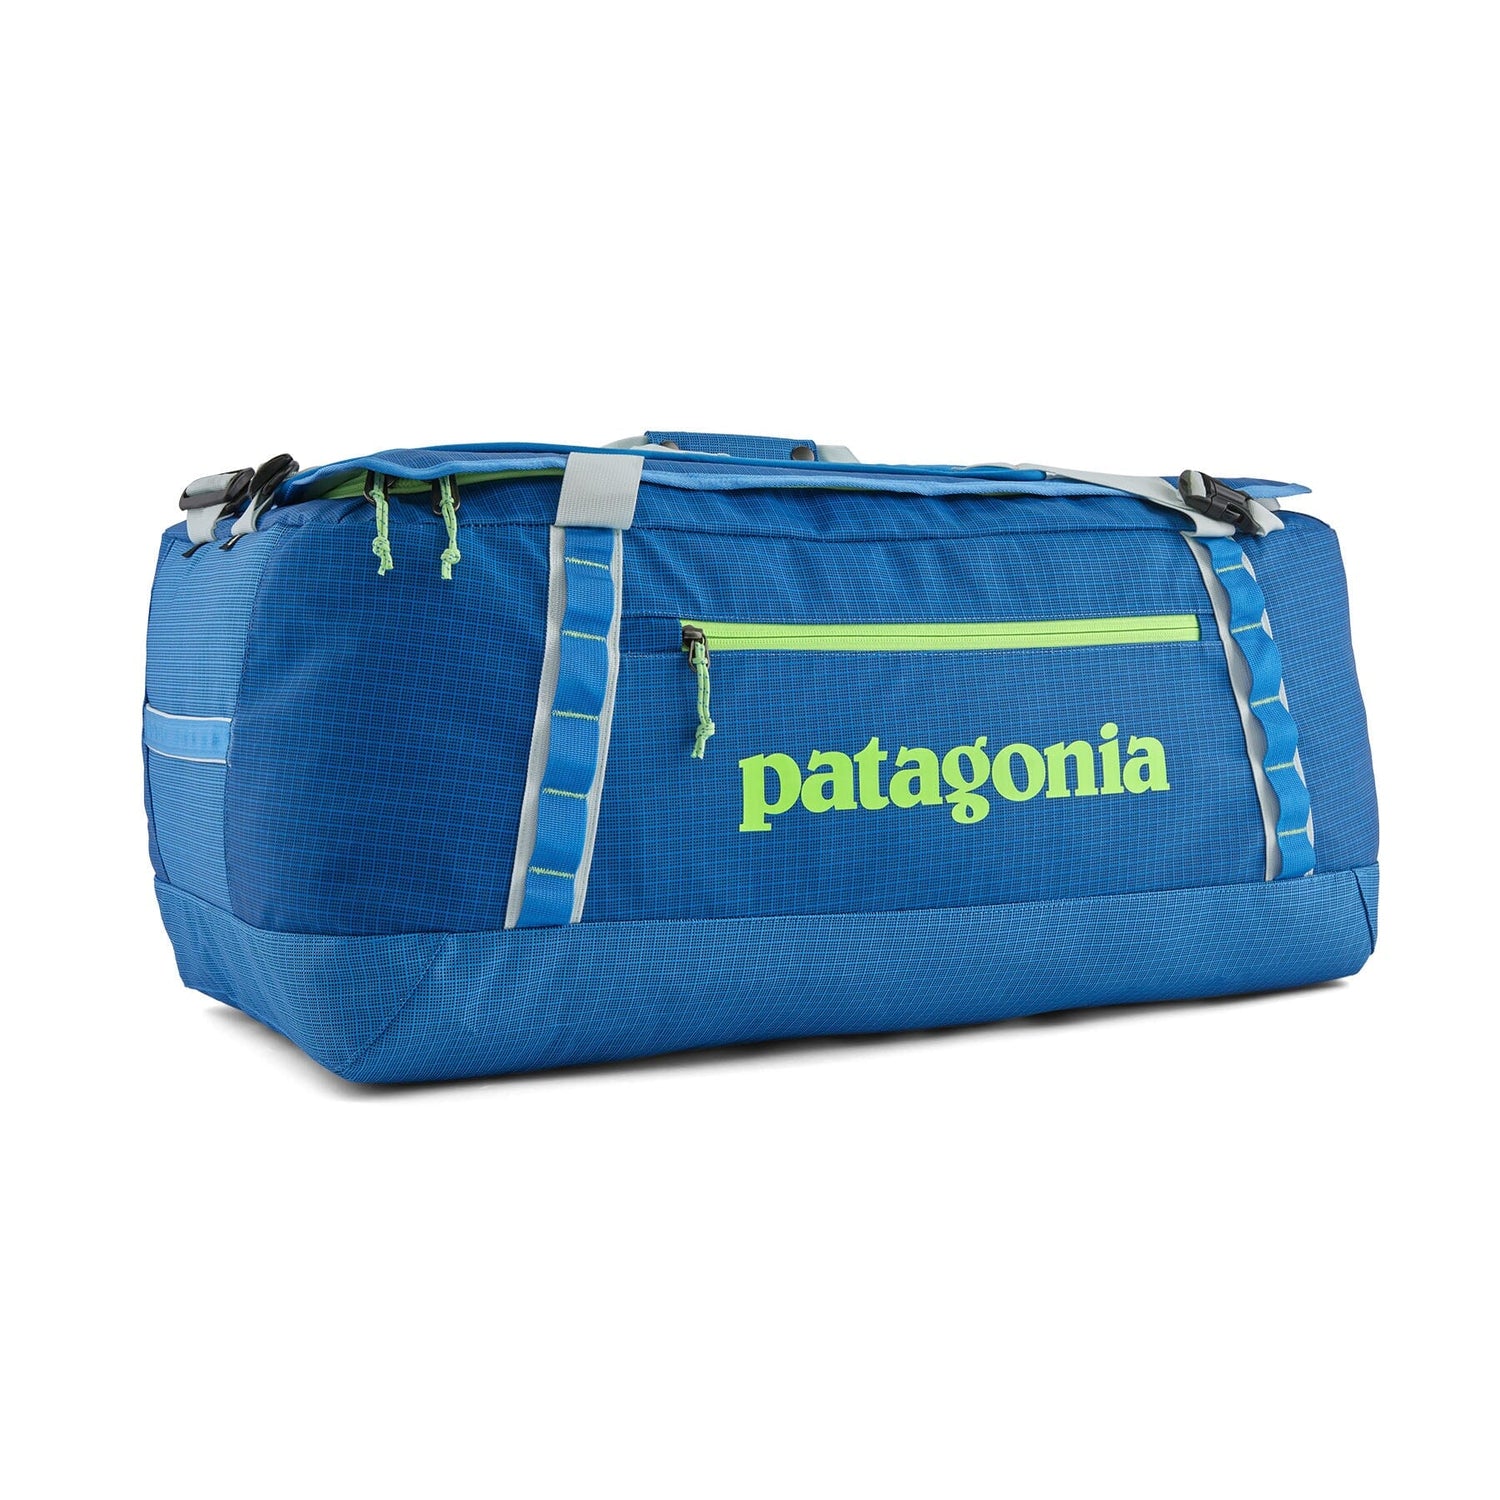 Patagonia - Black Hole Duffel 70L - 100% postconsumer recycled polyester - Weekendbee - sustainable sportswear